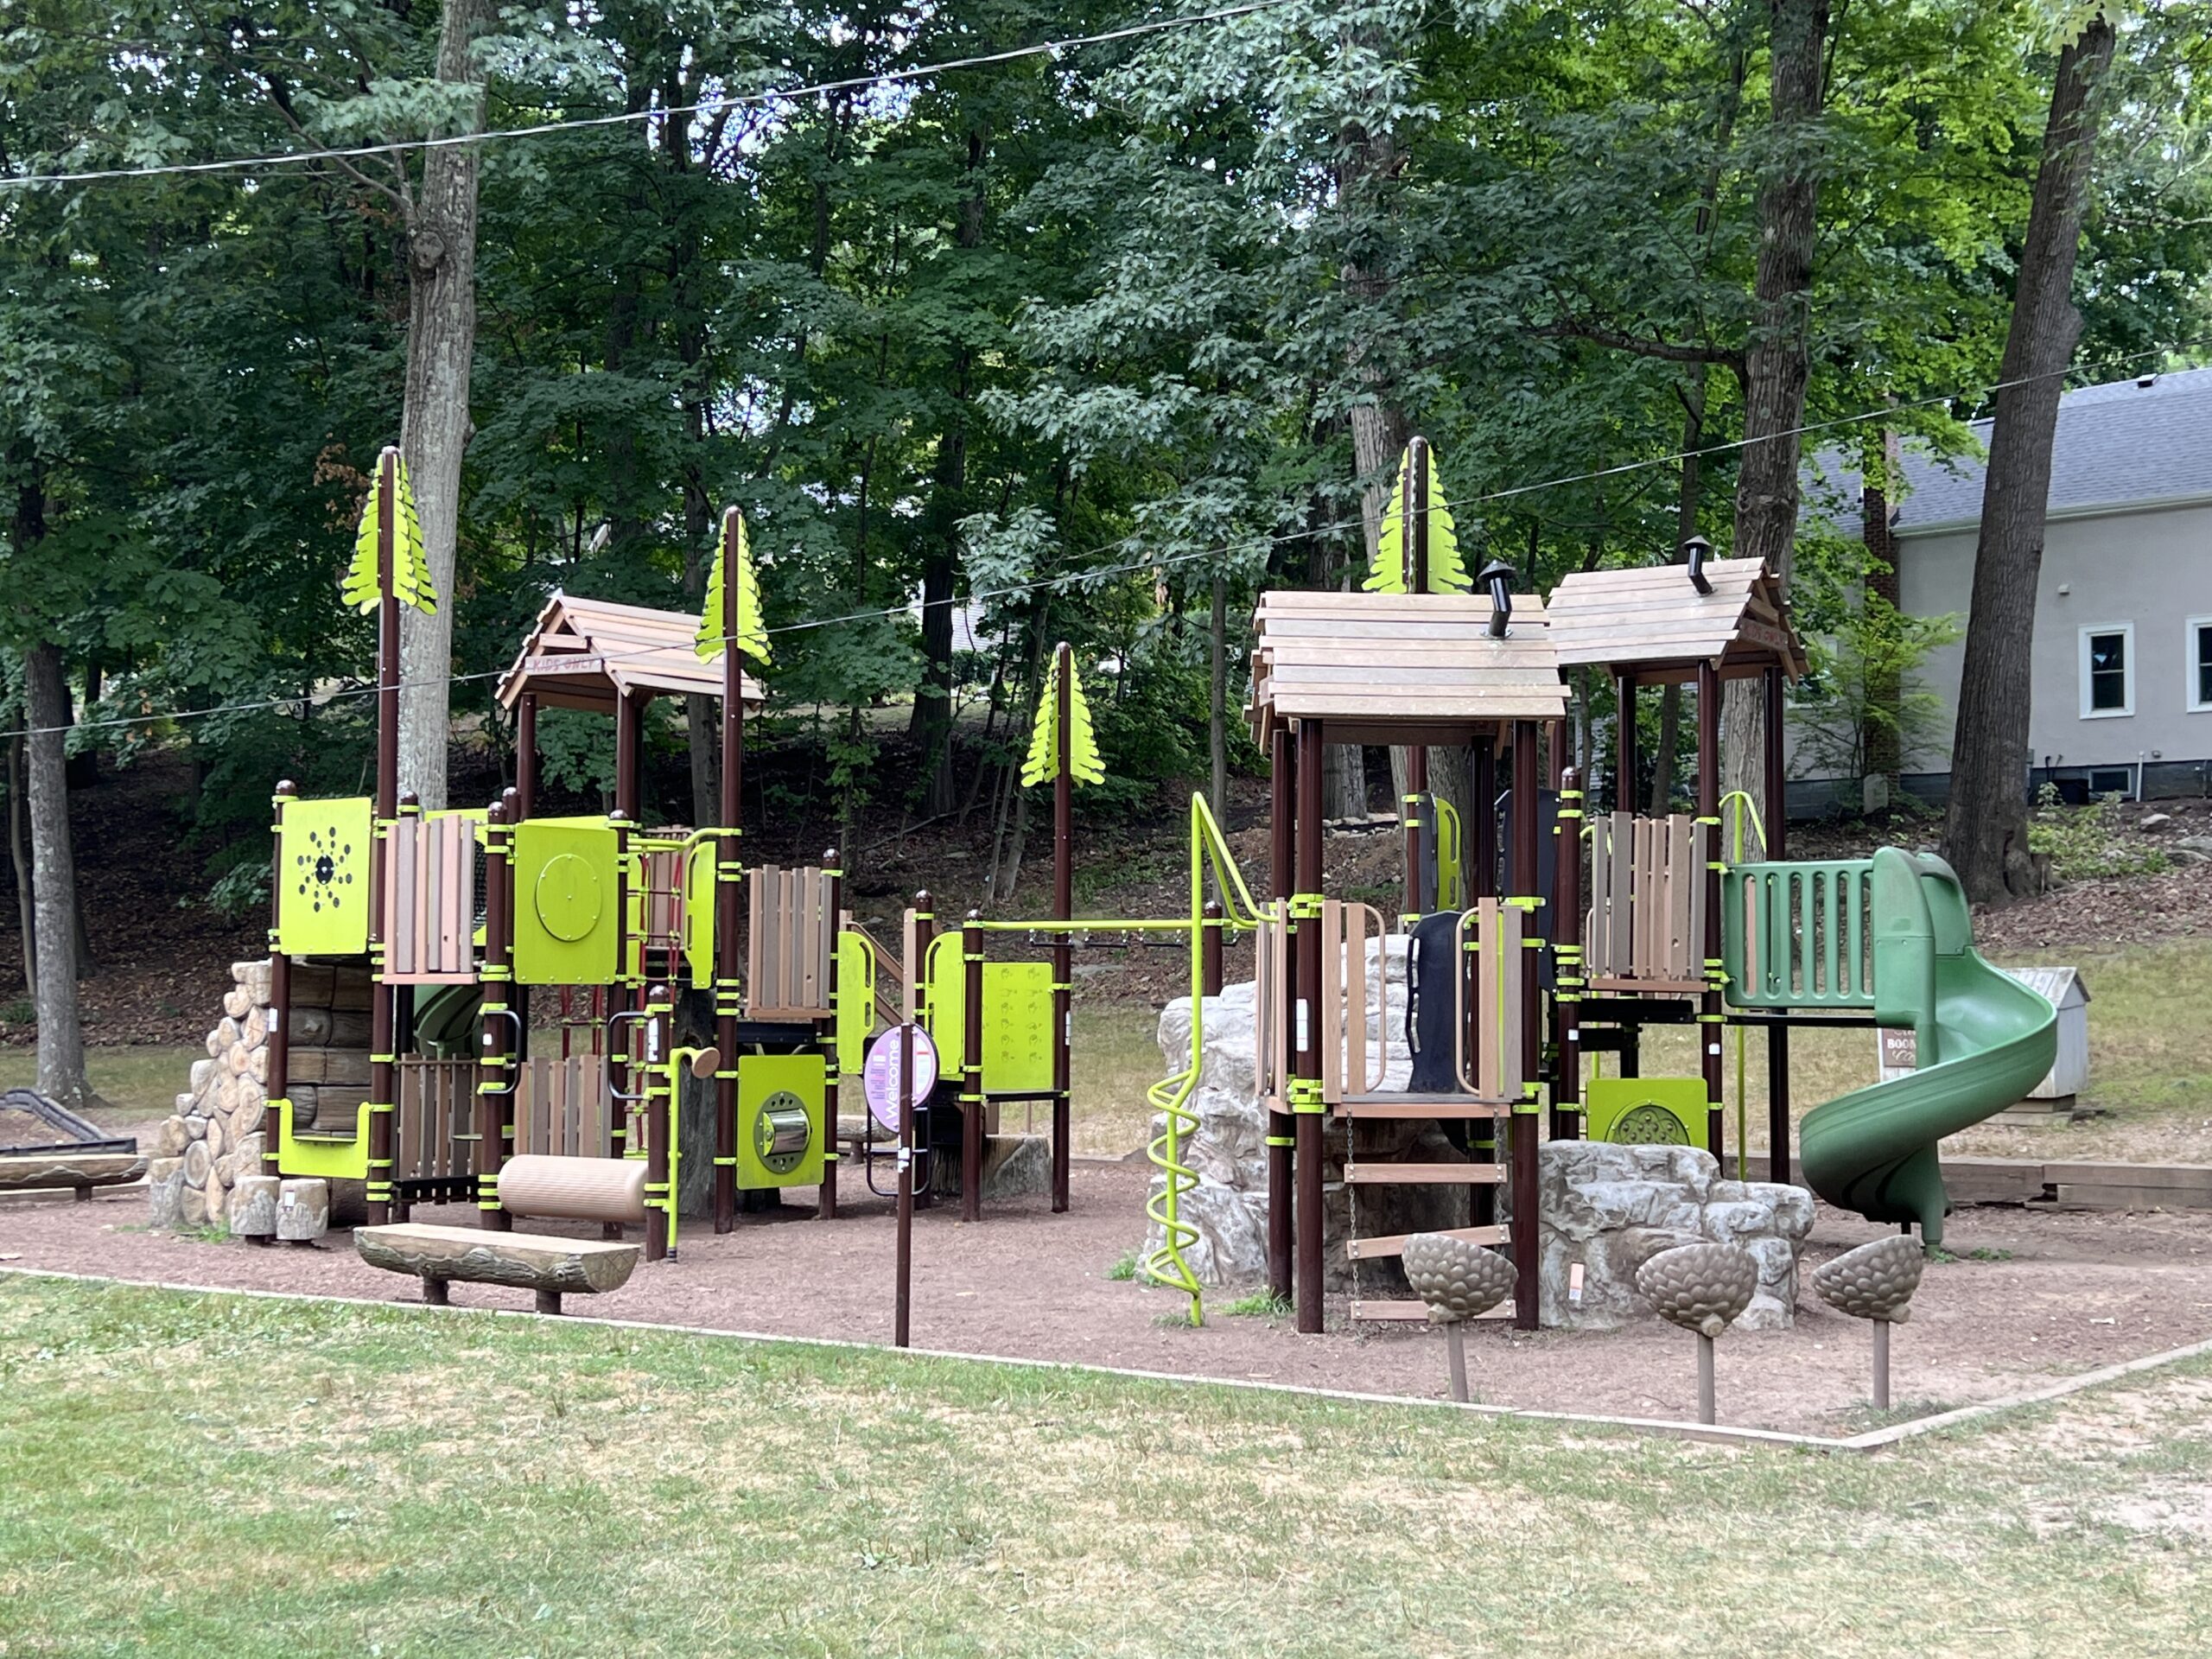 Grace Lord Park Playground in Boonton NJ - WIDE image - front of playground